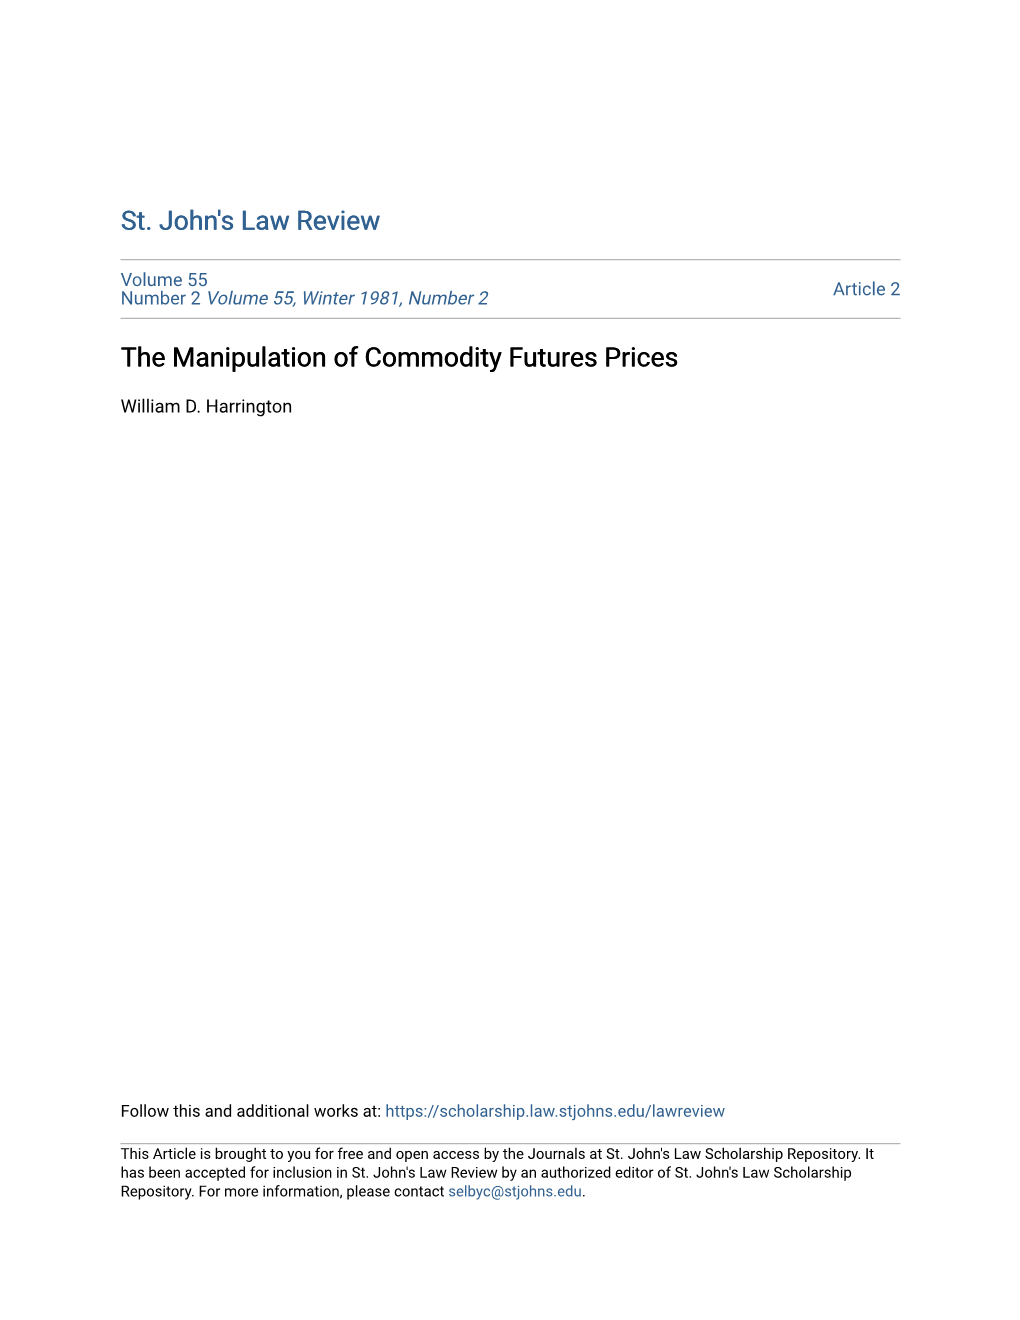 The Manipulation of Commodity Futures Prices